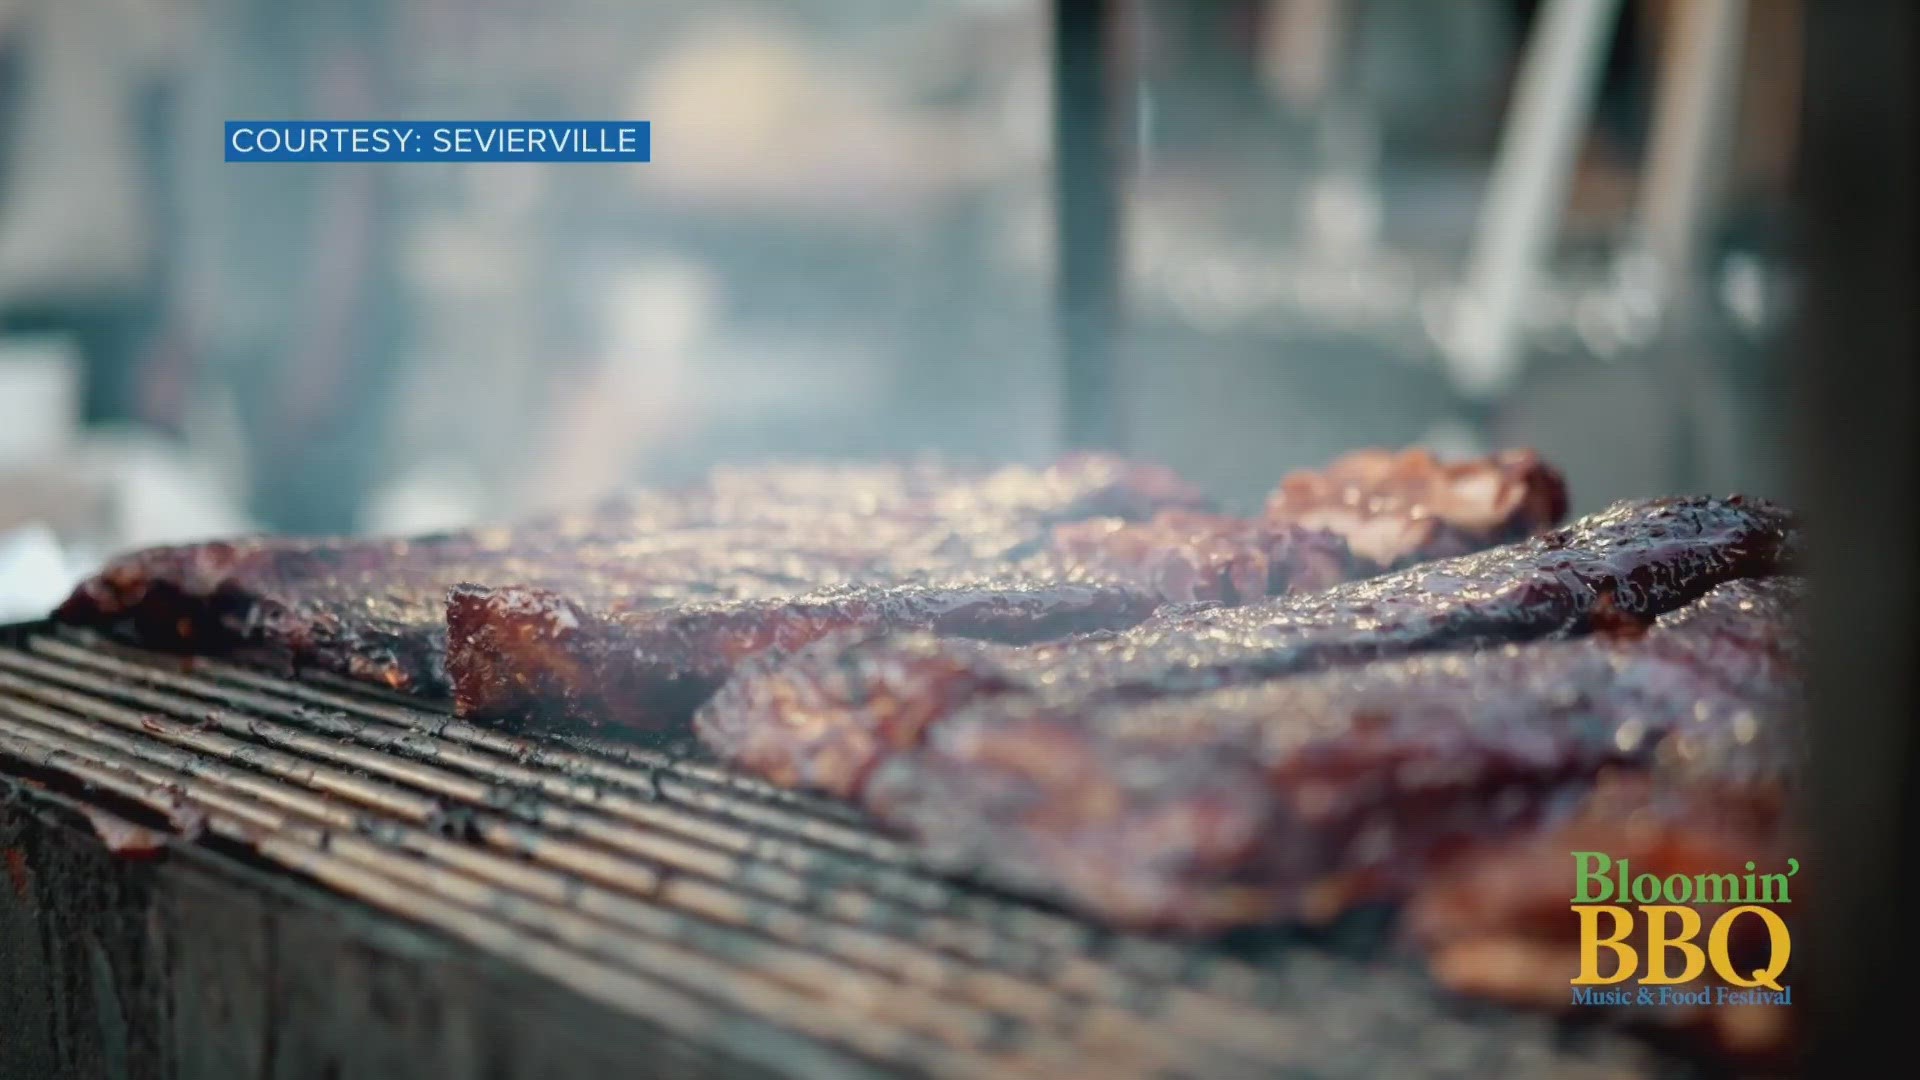 It's national barbecue month and Sevier County is celebrating in style. This weekend is the annual "Bloomin Barbecue Music and Food Festival."